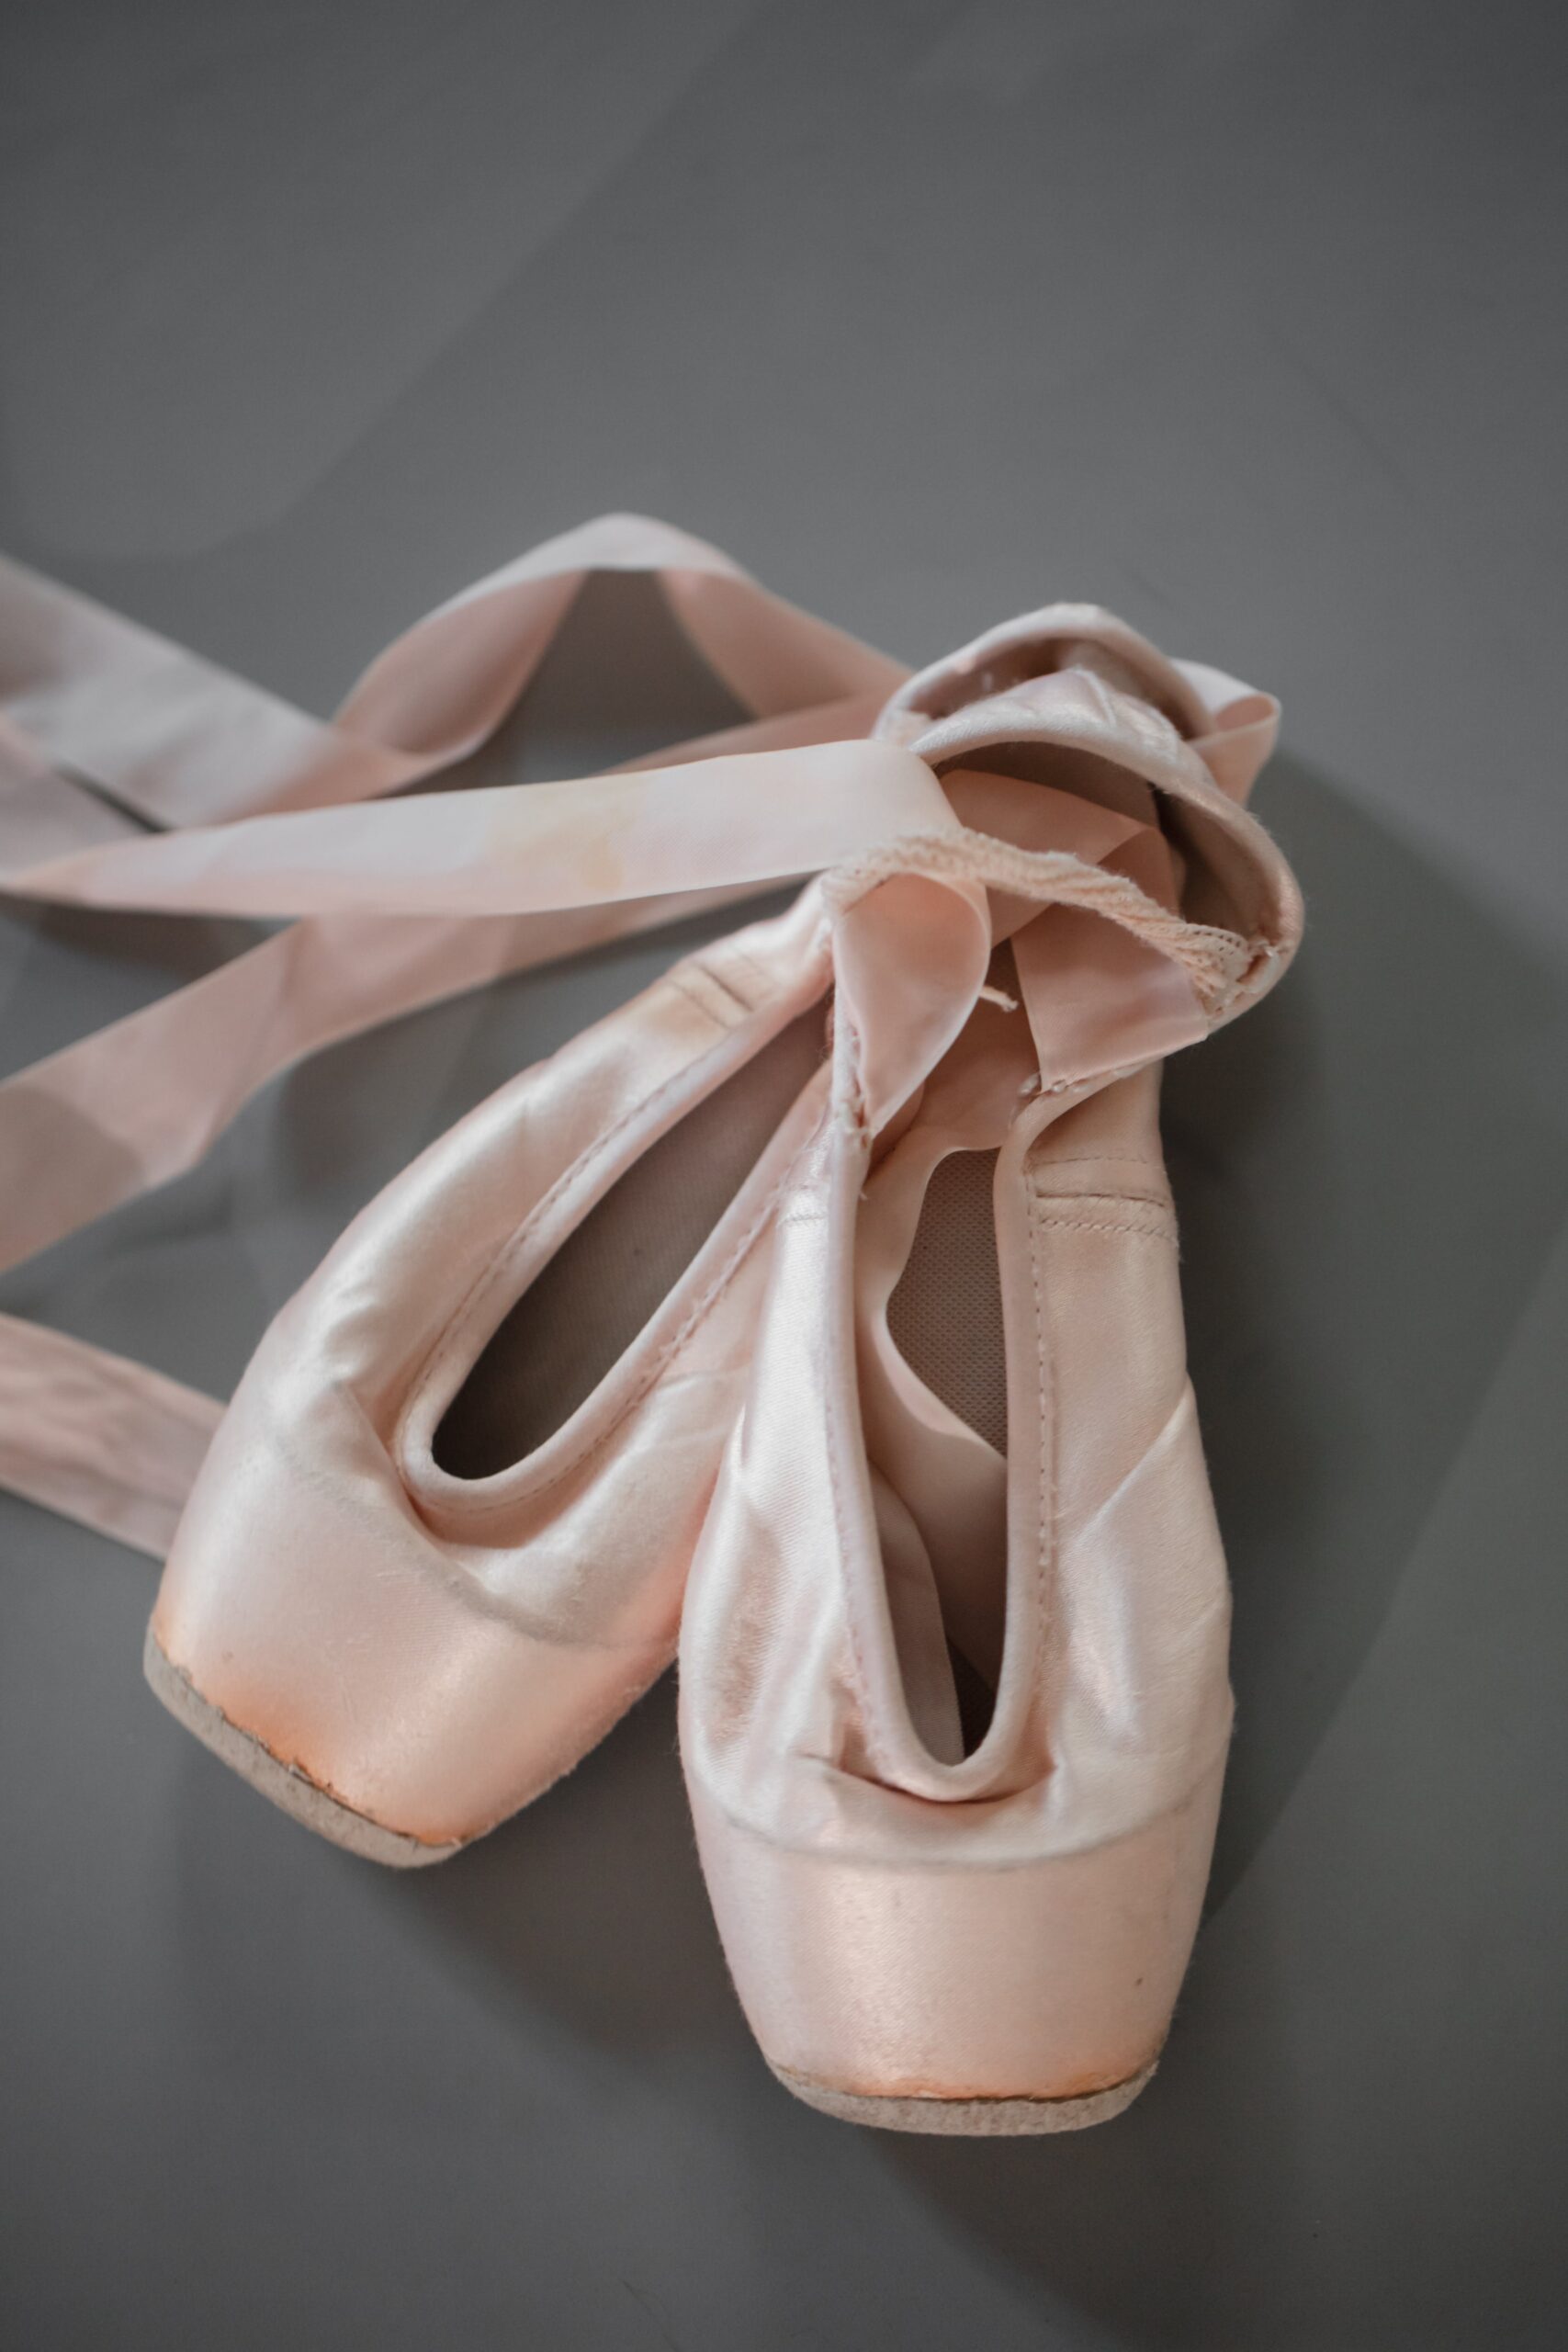 What You Need to Know About Pointe Shoes